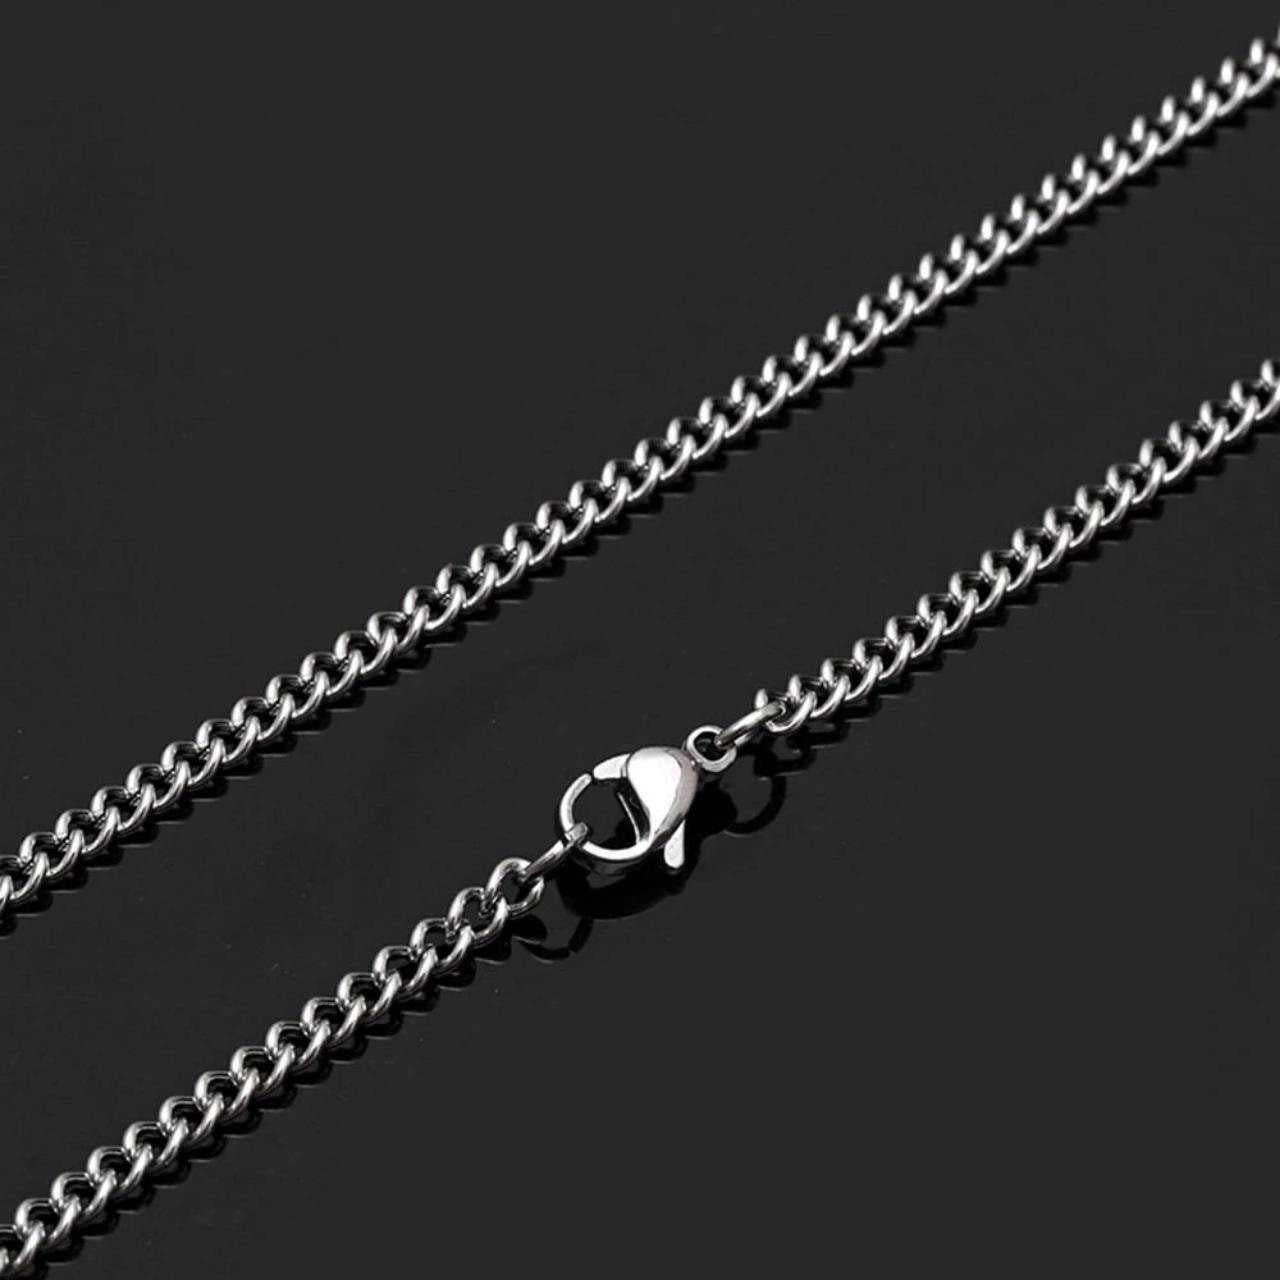 CRW Alien Spaceship Necklace with 1.8mm curb chain in silver - Shape Necklaces for Women - Area 51 Necklace for Men - Necklace with Pendant